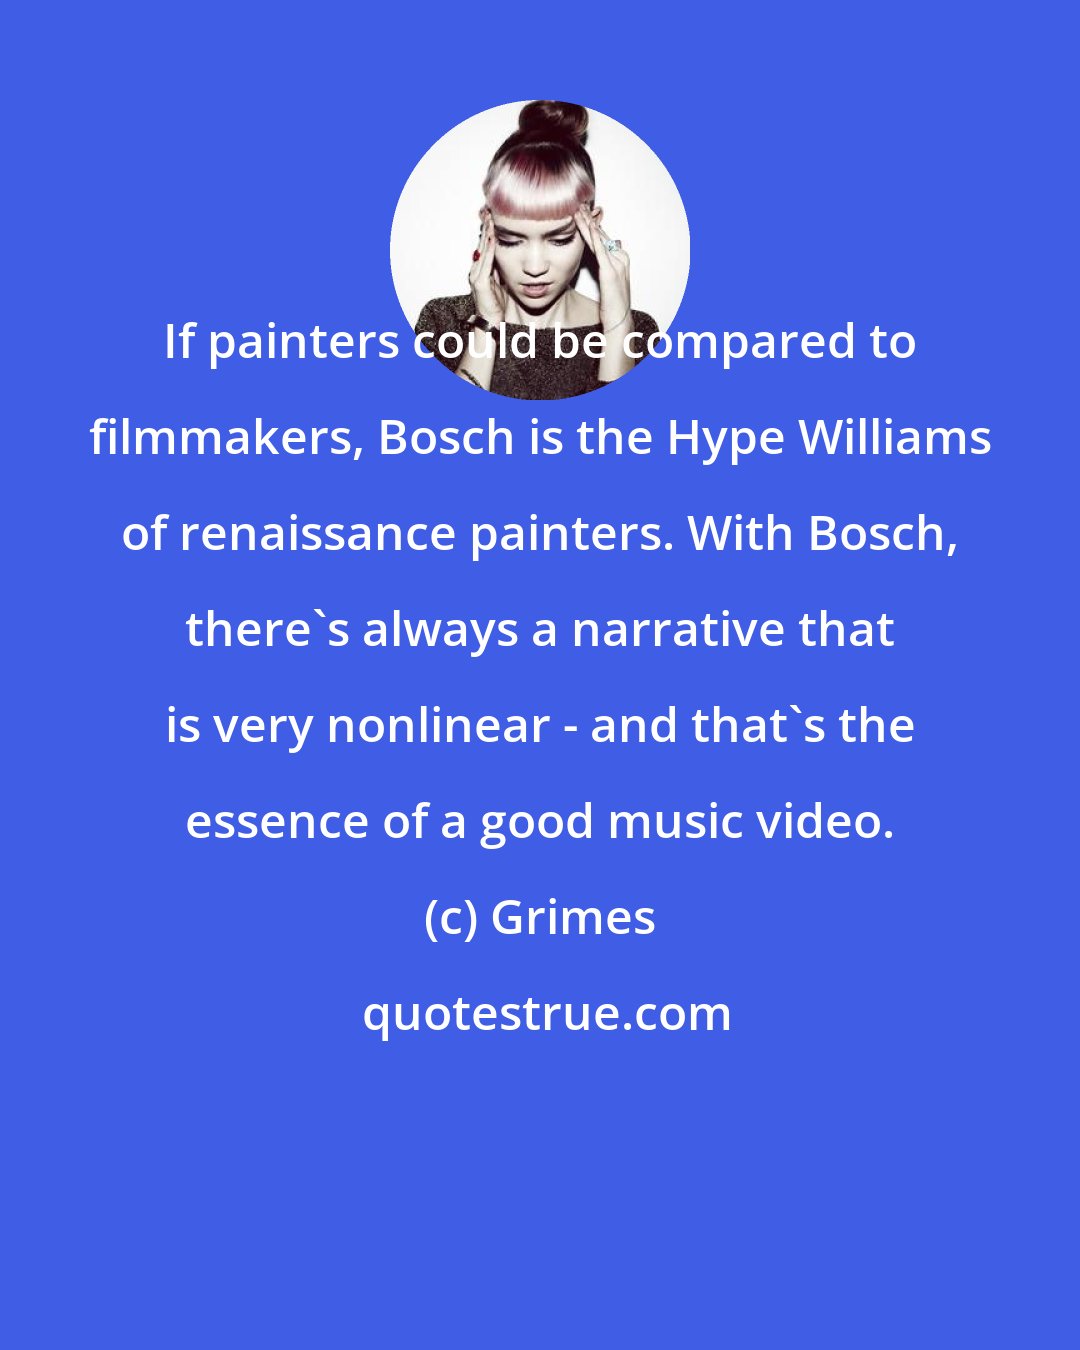 Grimes: If painters could be compared to filmmakers, Bosch is the Hype Williams of renaissance painters. With Bosch, there's always a narrative that is very nonlinear - and that's the essence of a good music video.